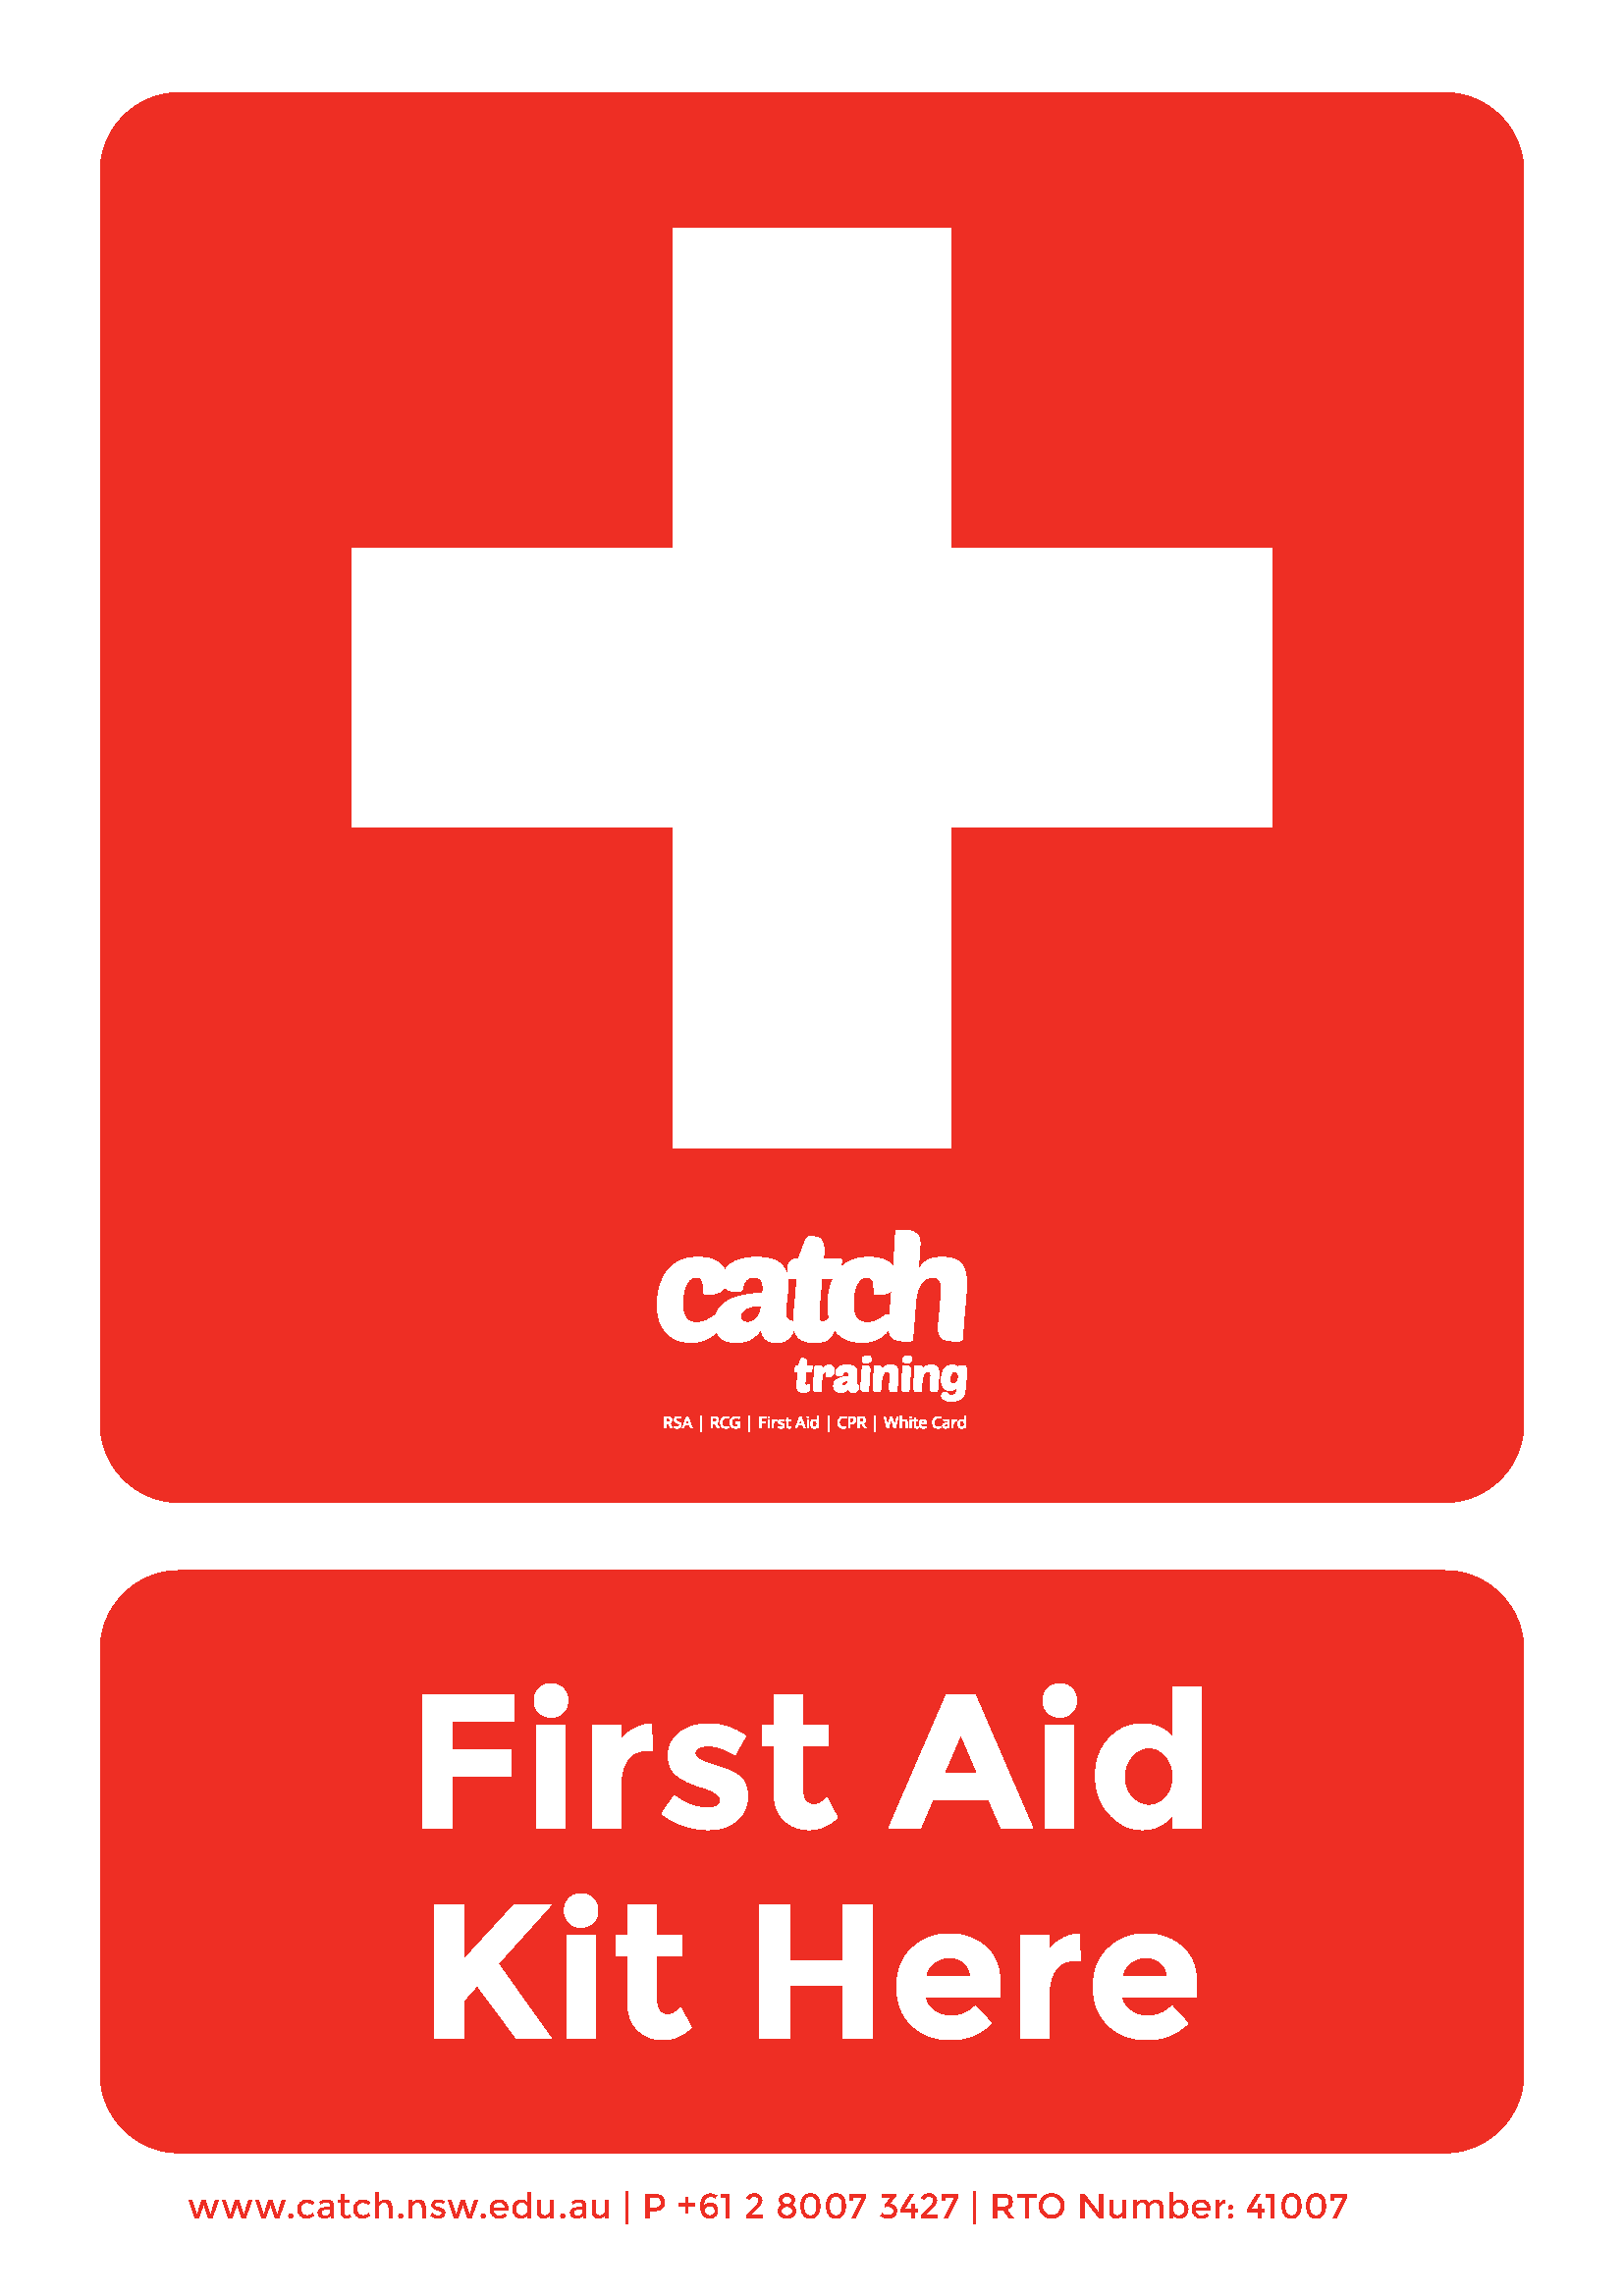 First Aid Downloads | Catch Training